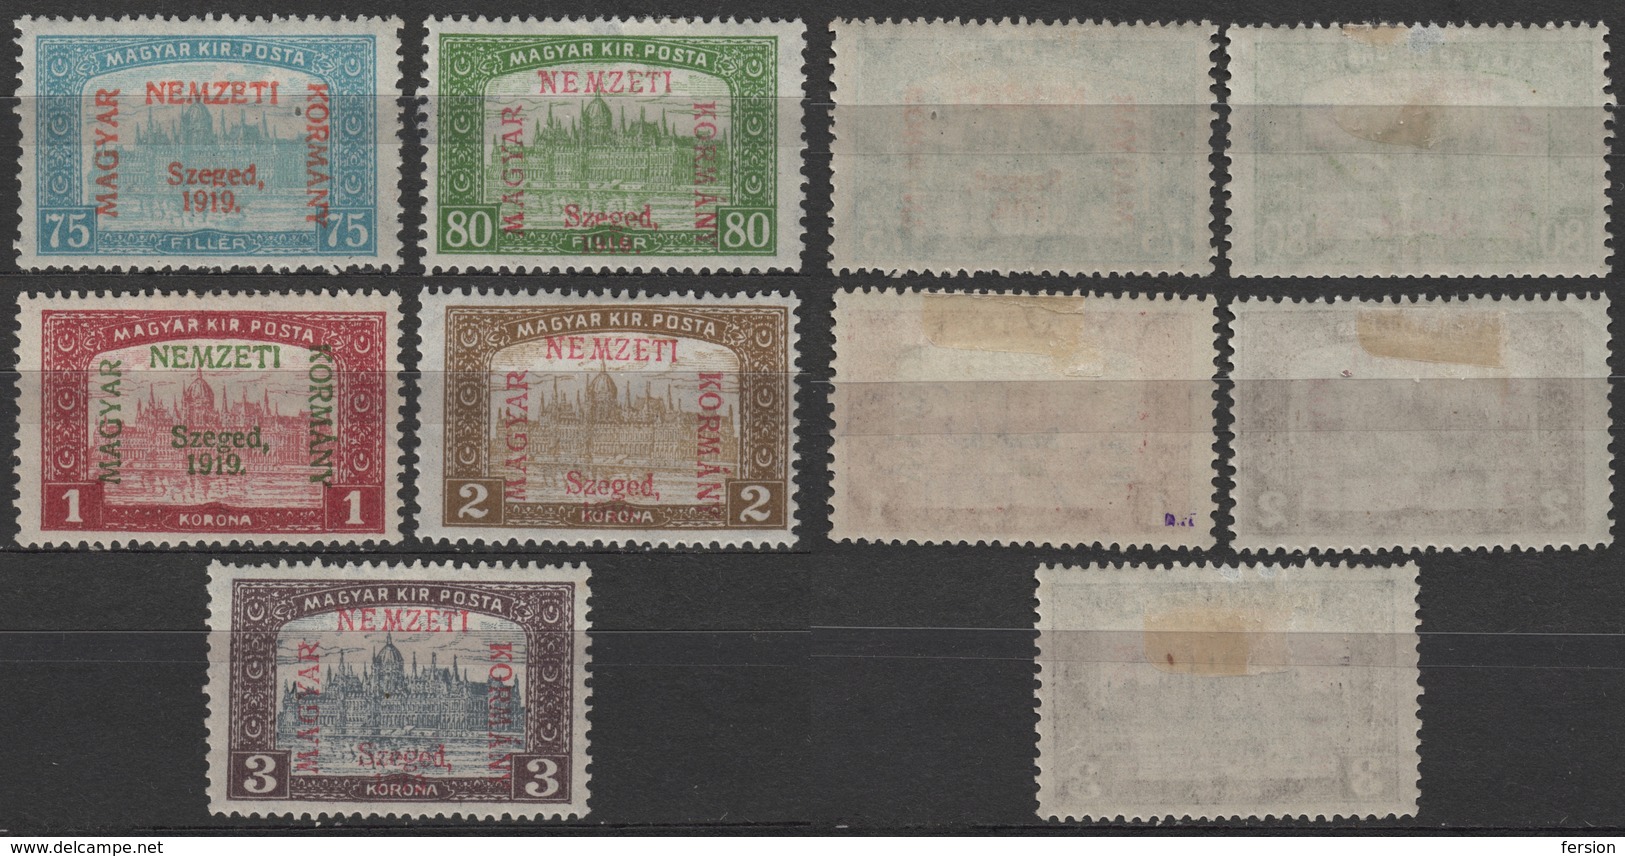 1919 France Occupation Local SZEGED - Hungary - Parliament Overprint - MH LOT - Nuovi